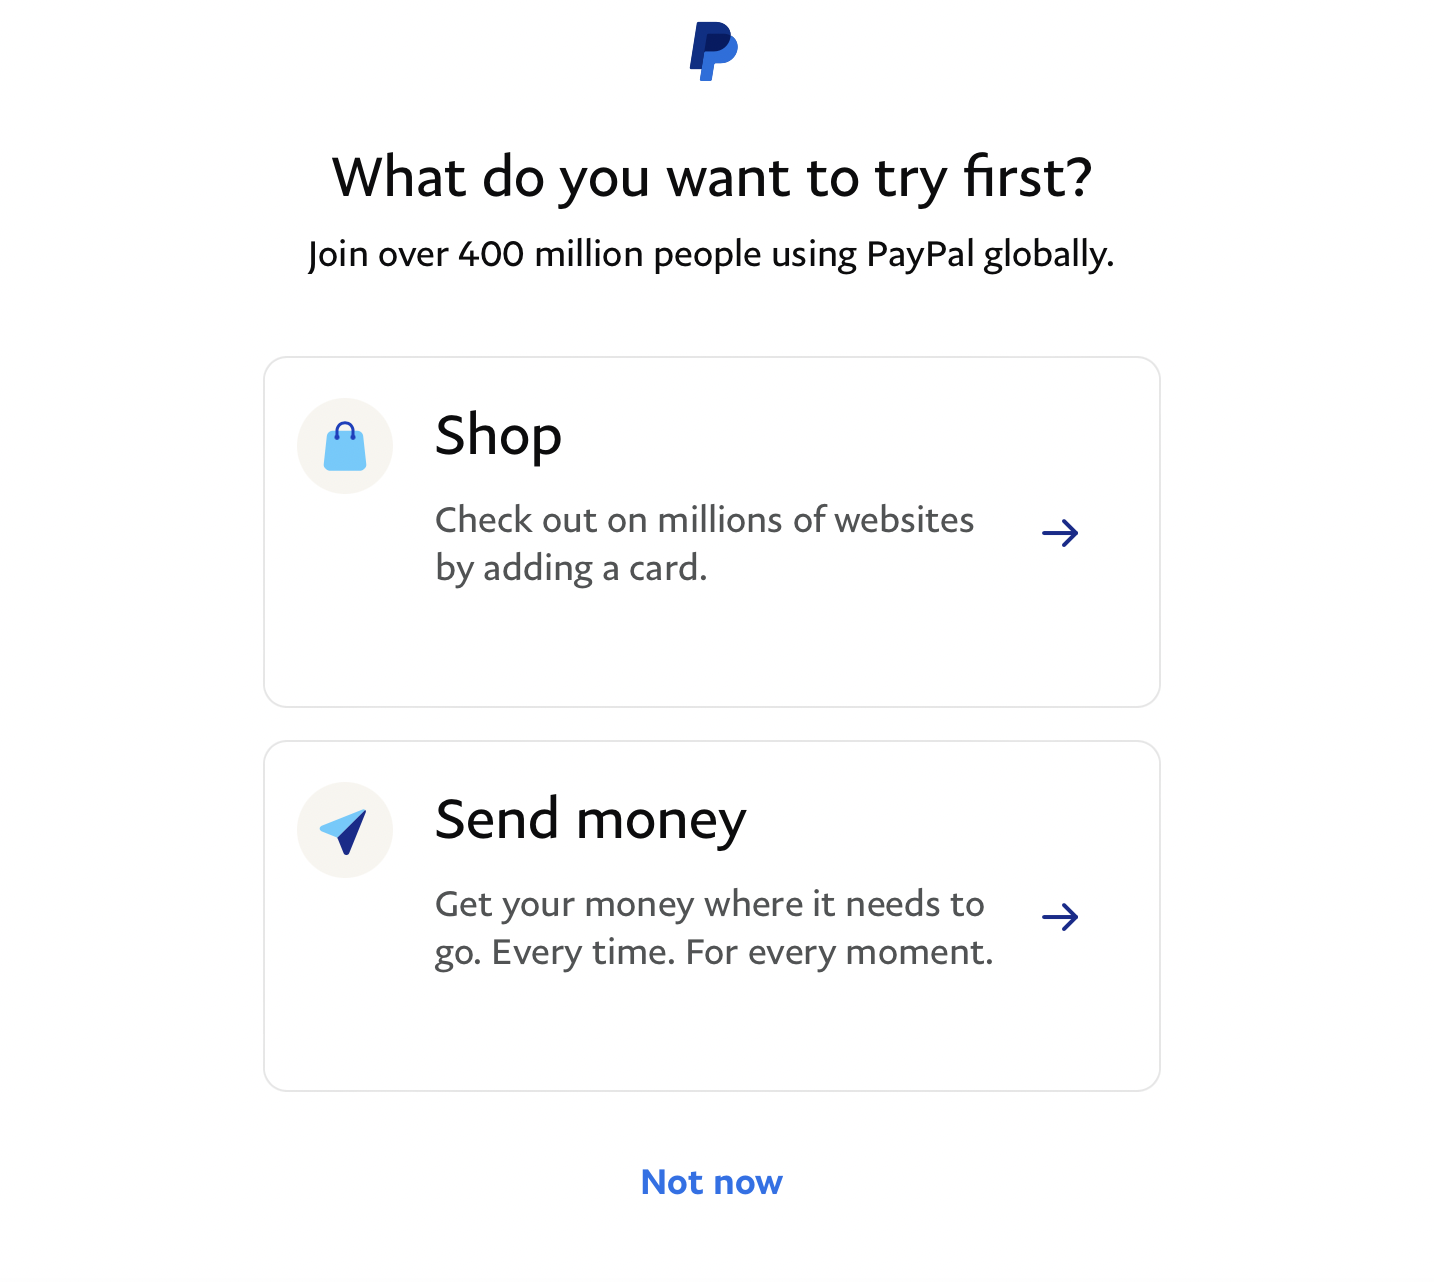 How to sign up for PayPal: Step-by-step guide